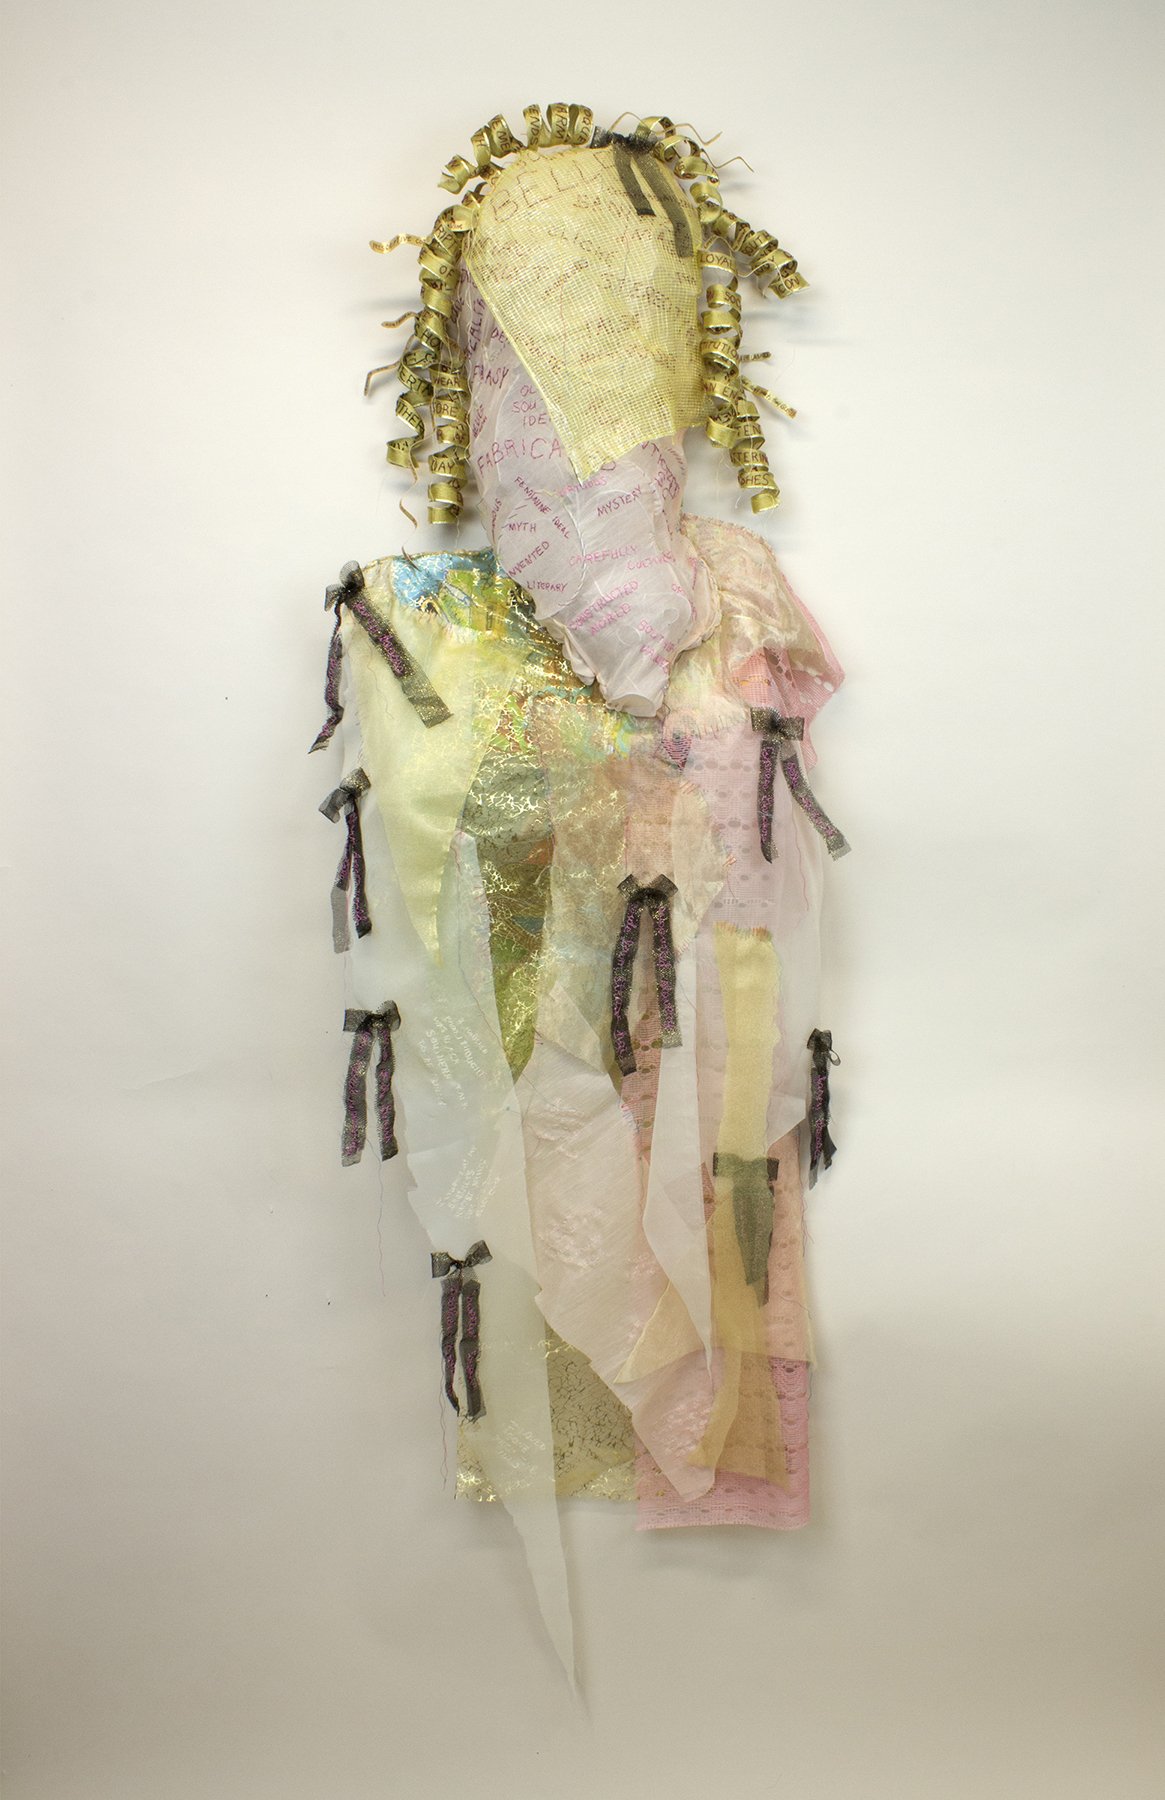    The Flower of the South,   crushed and reclaimed old work (steel, ceramic, thread, paper, acrylic), reclaimed food net/fabric/thread/paper/ribbon, steel, thread, 65 x 19 x 9 inches 